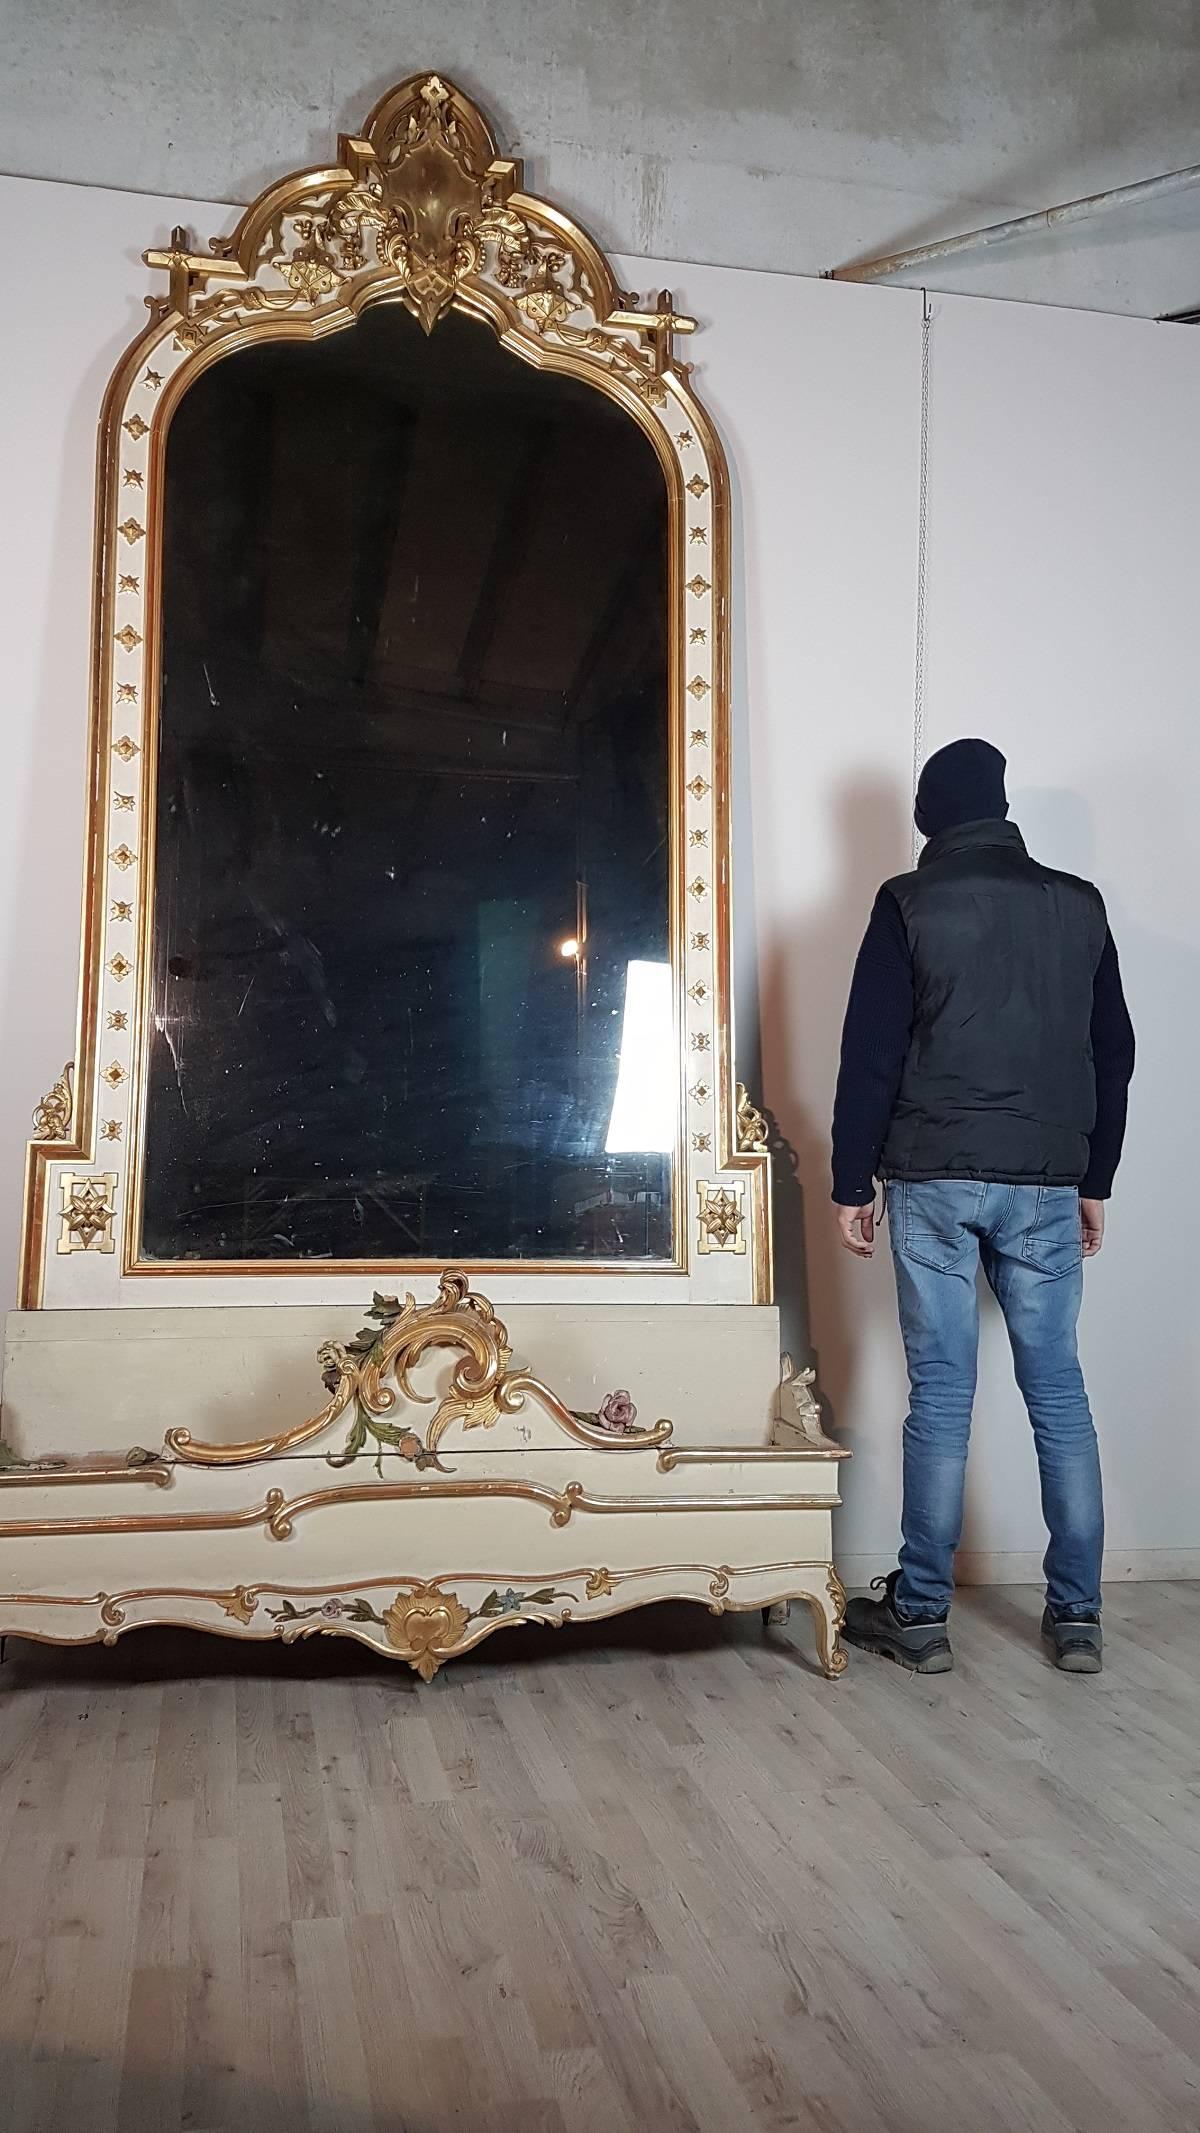 Beautiful elegant spectacular mirror with planter at the base large size in perfect Italian baroque style wood finely and richly carved with swirls of great refinement lacquered and decorated in gold leaf. The mirror, as you can see from the images,